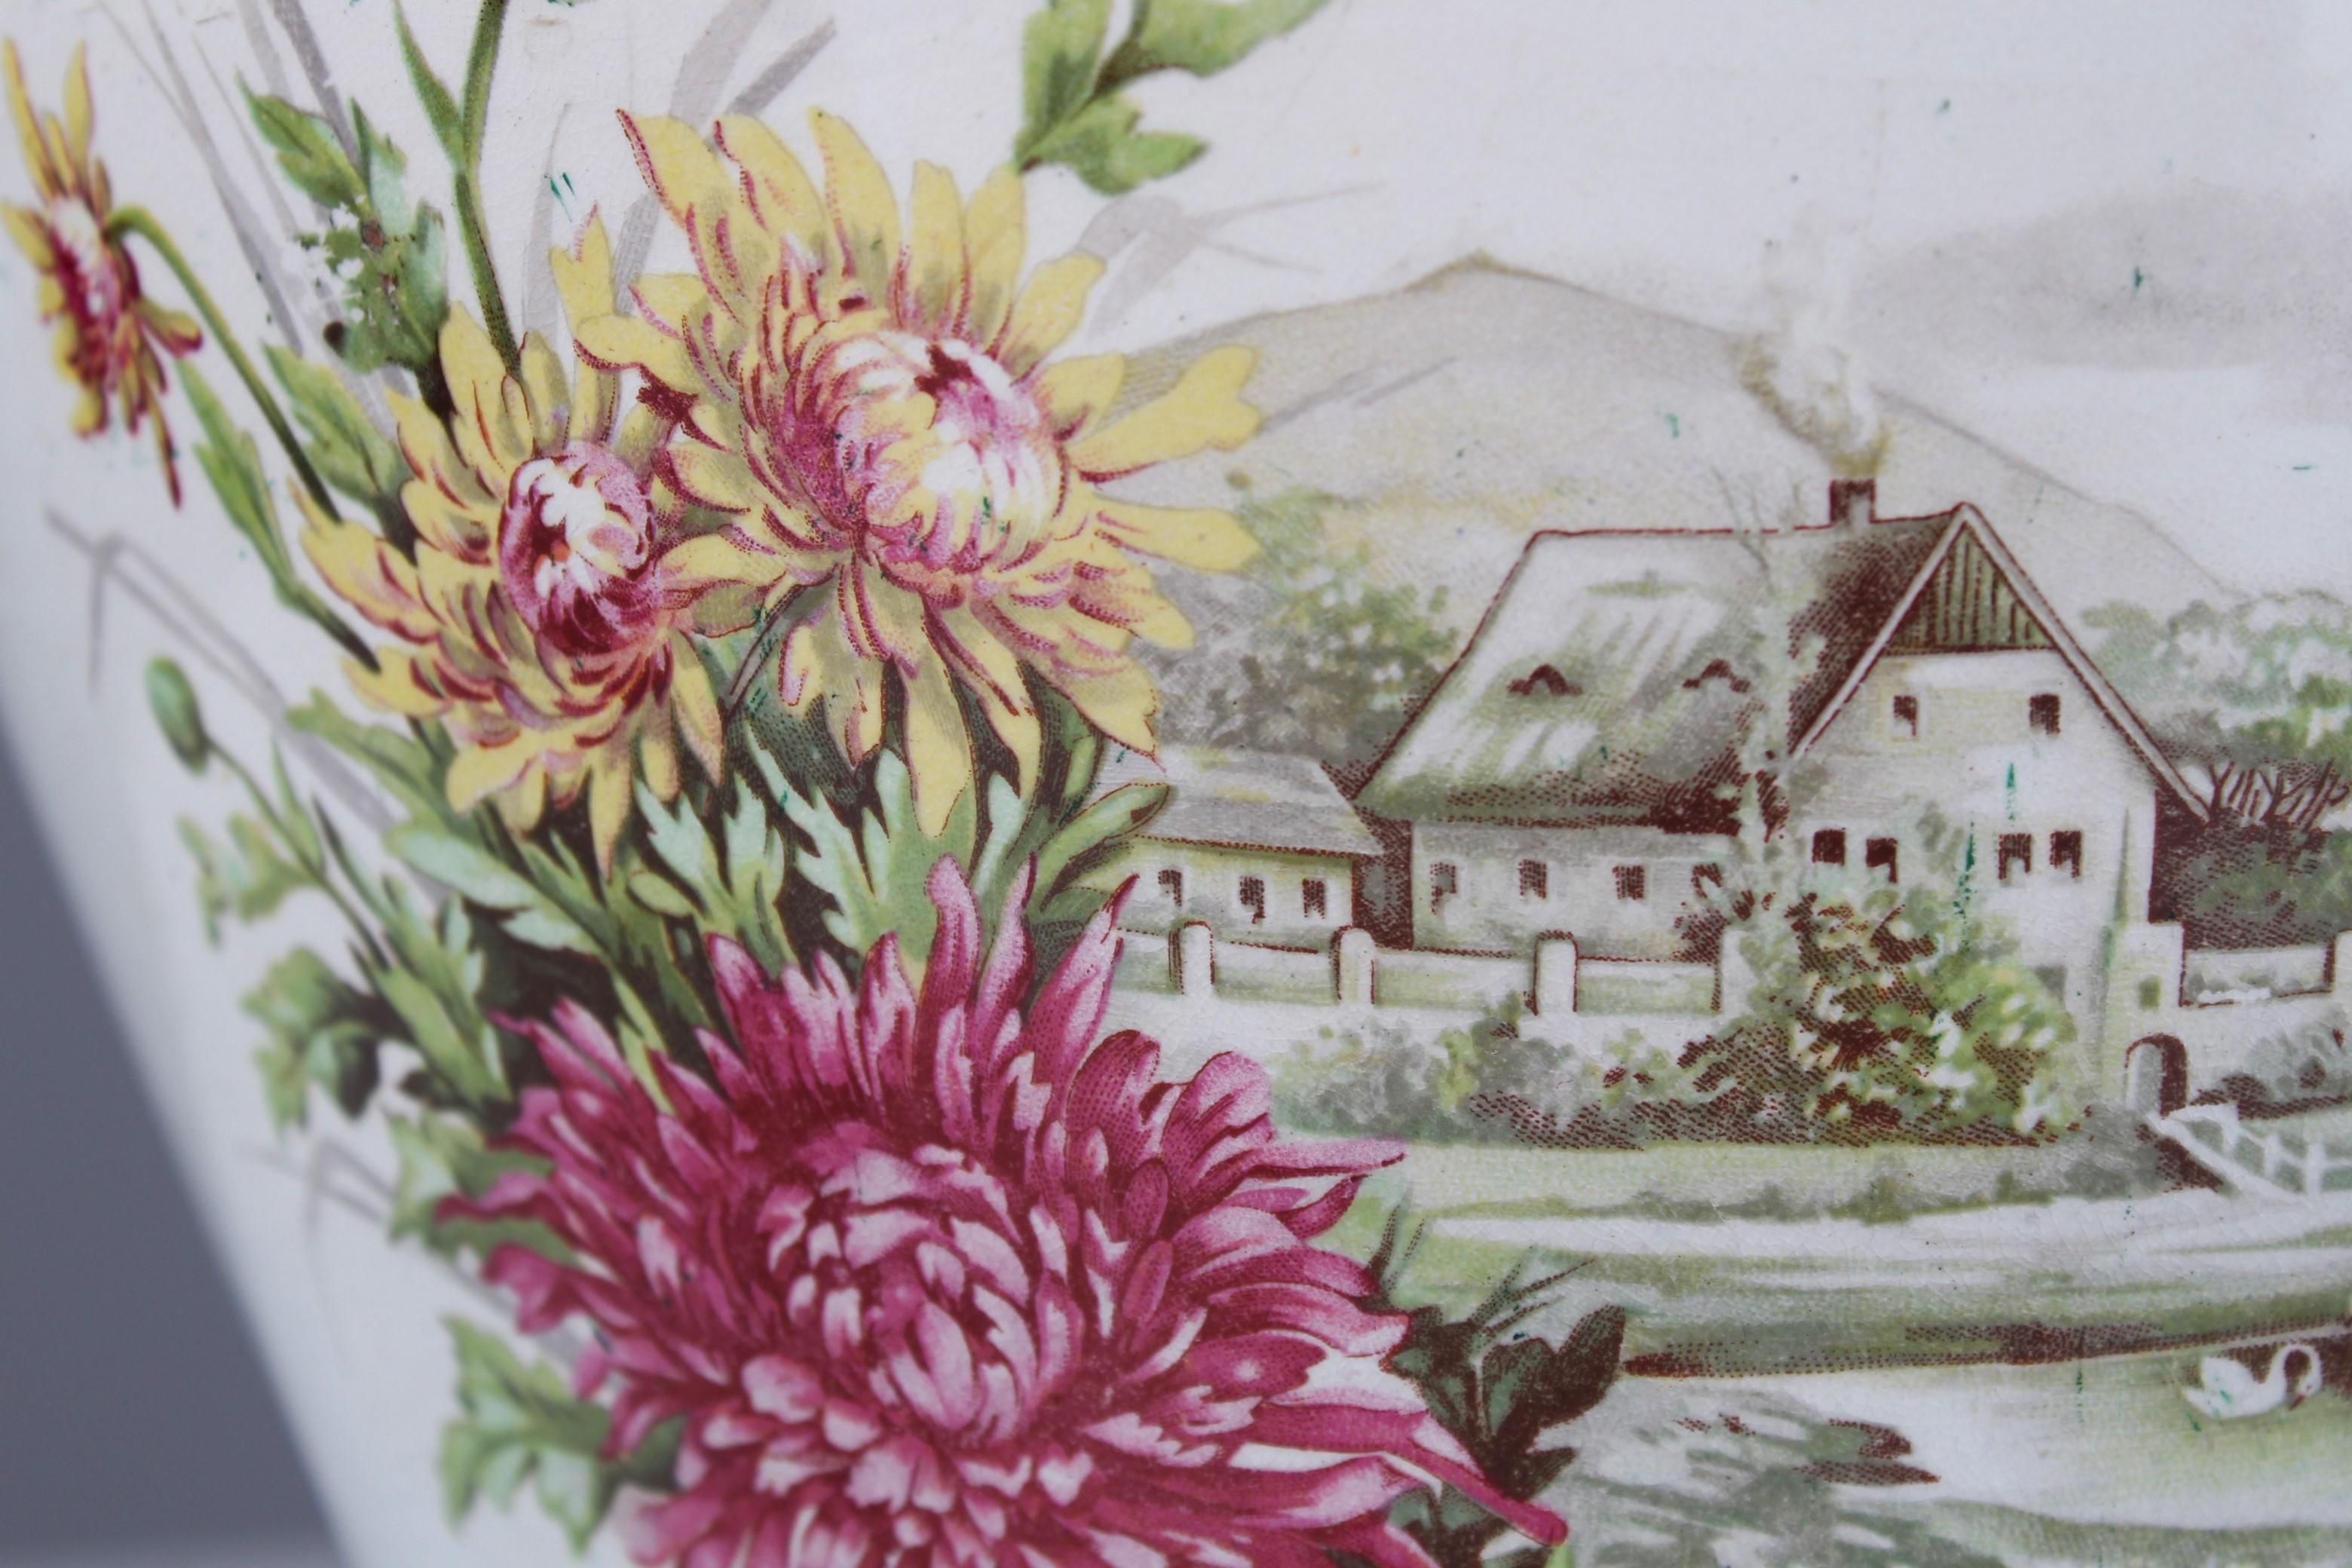 Beautifully crafted flower pot, France, 1880.
With a curved and gilded edging on the top.
The front shows a hand-painted country house with a pond in which two swans are swimming. Floral tendrils in pink and yellow frame the rural scene.


